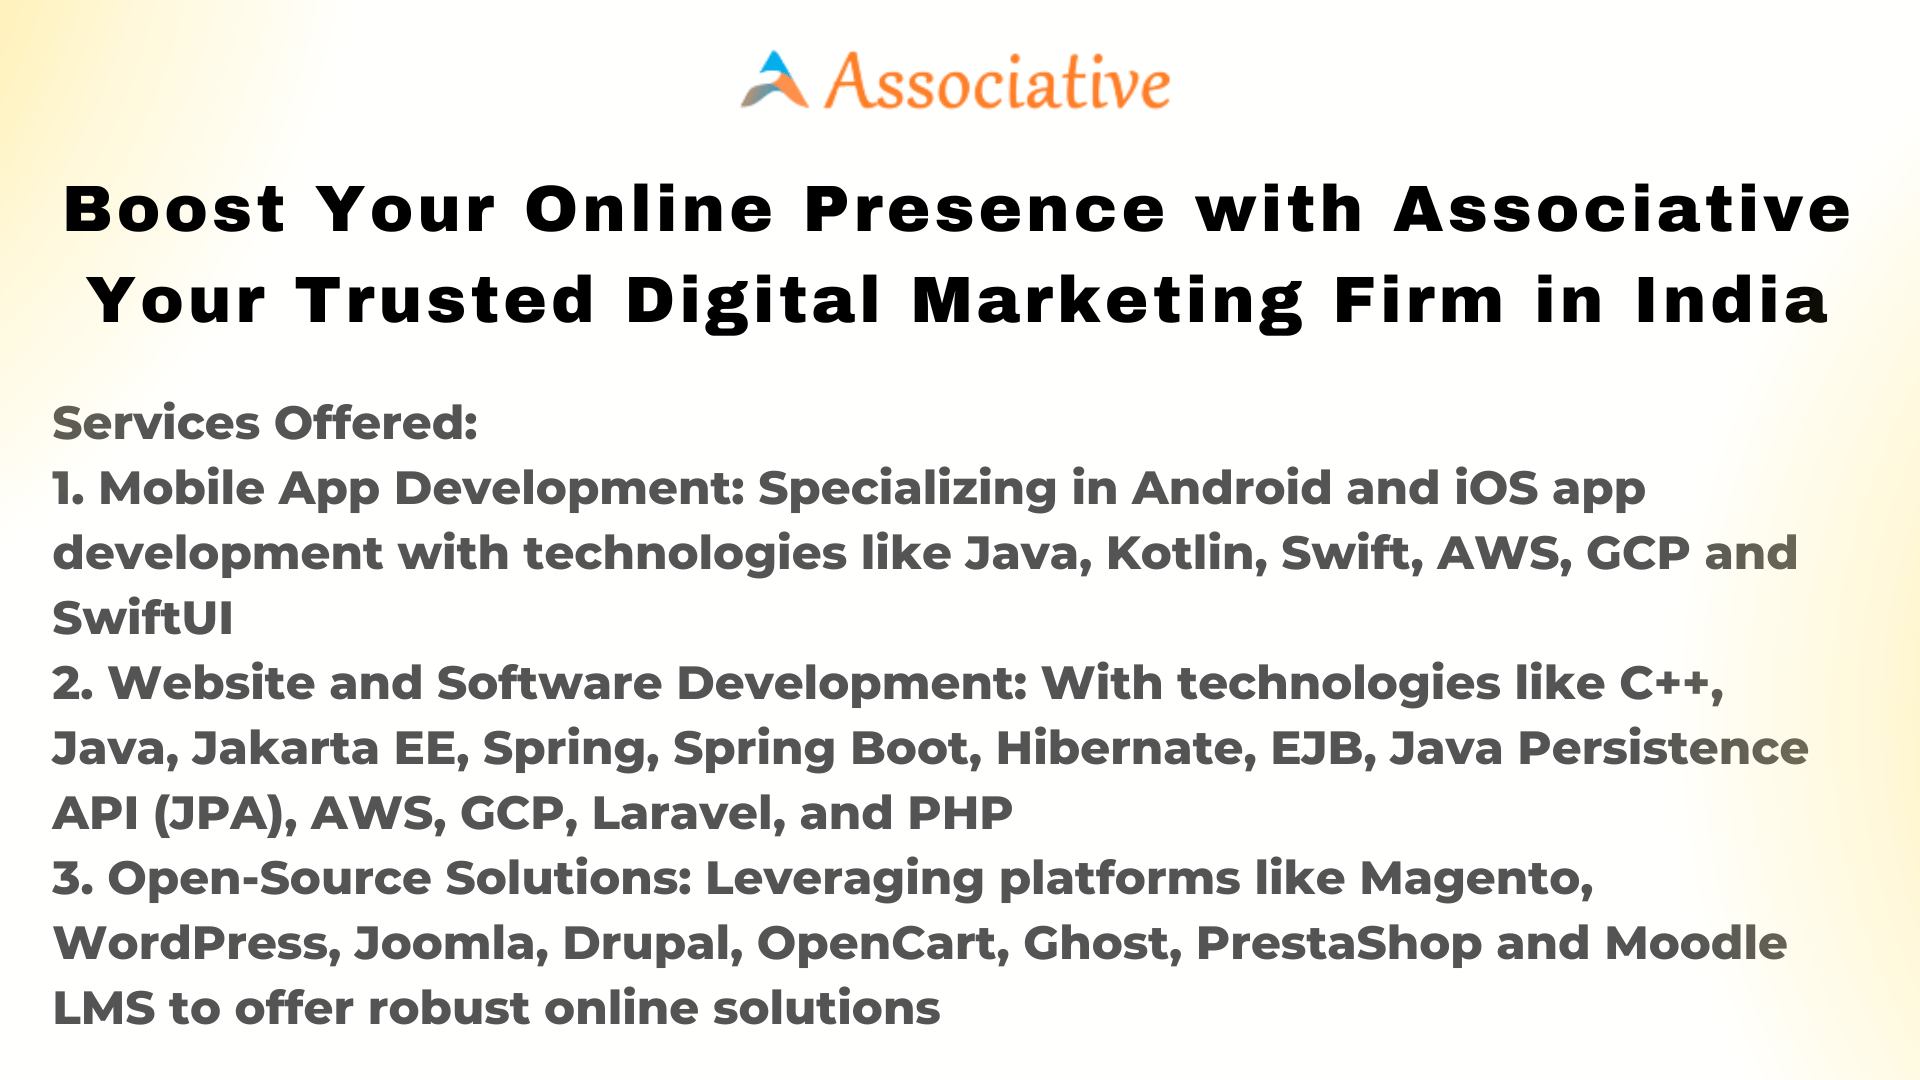 Boost Your Online Presence with Associative Your Trusted Digital Marketing Firm in India